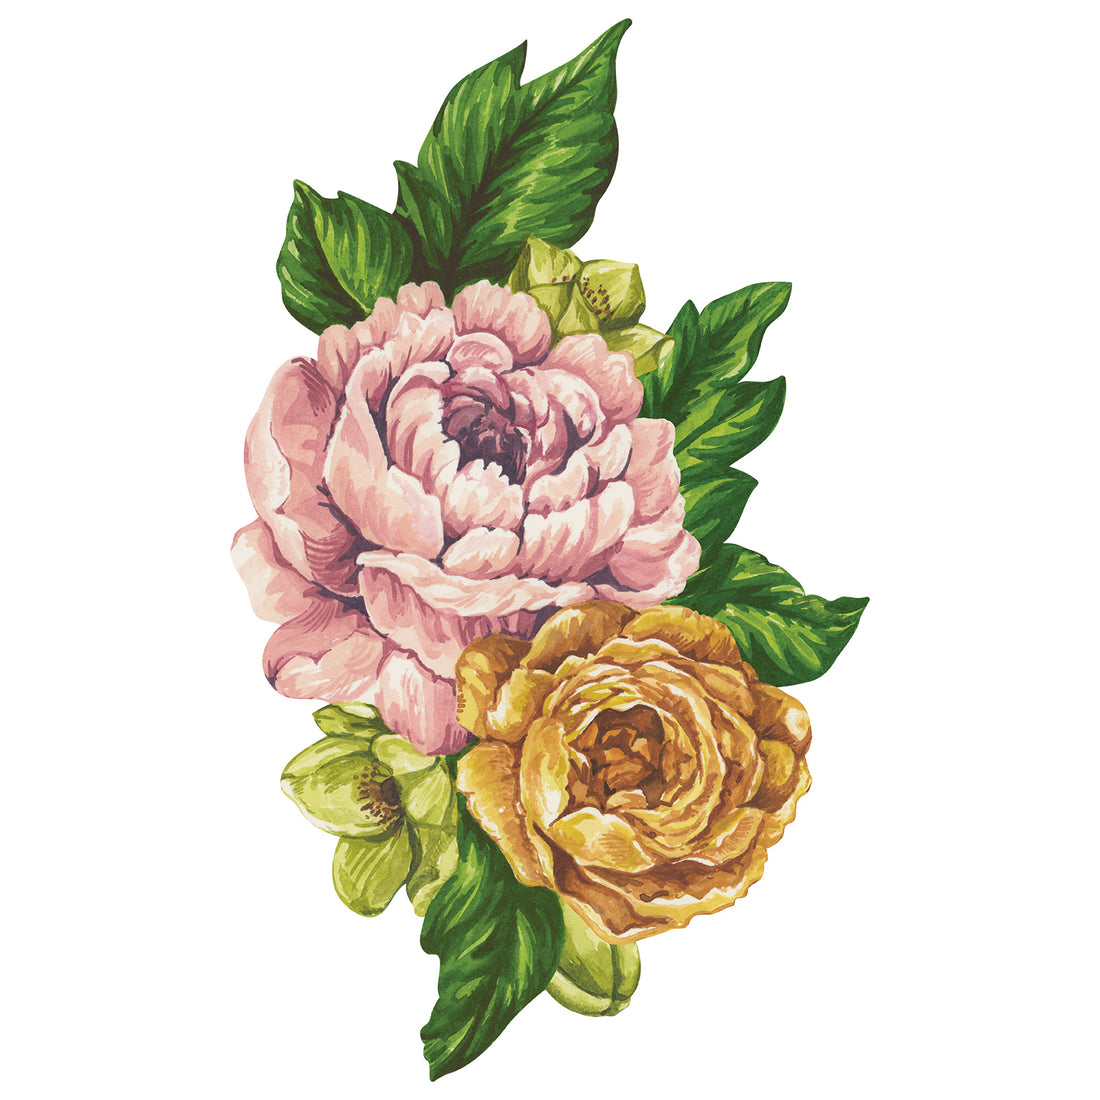 A die-cut illustration of blooms in muted pink, yellow-orange, and light green packed with deep green leaves.